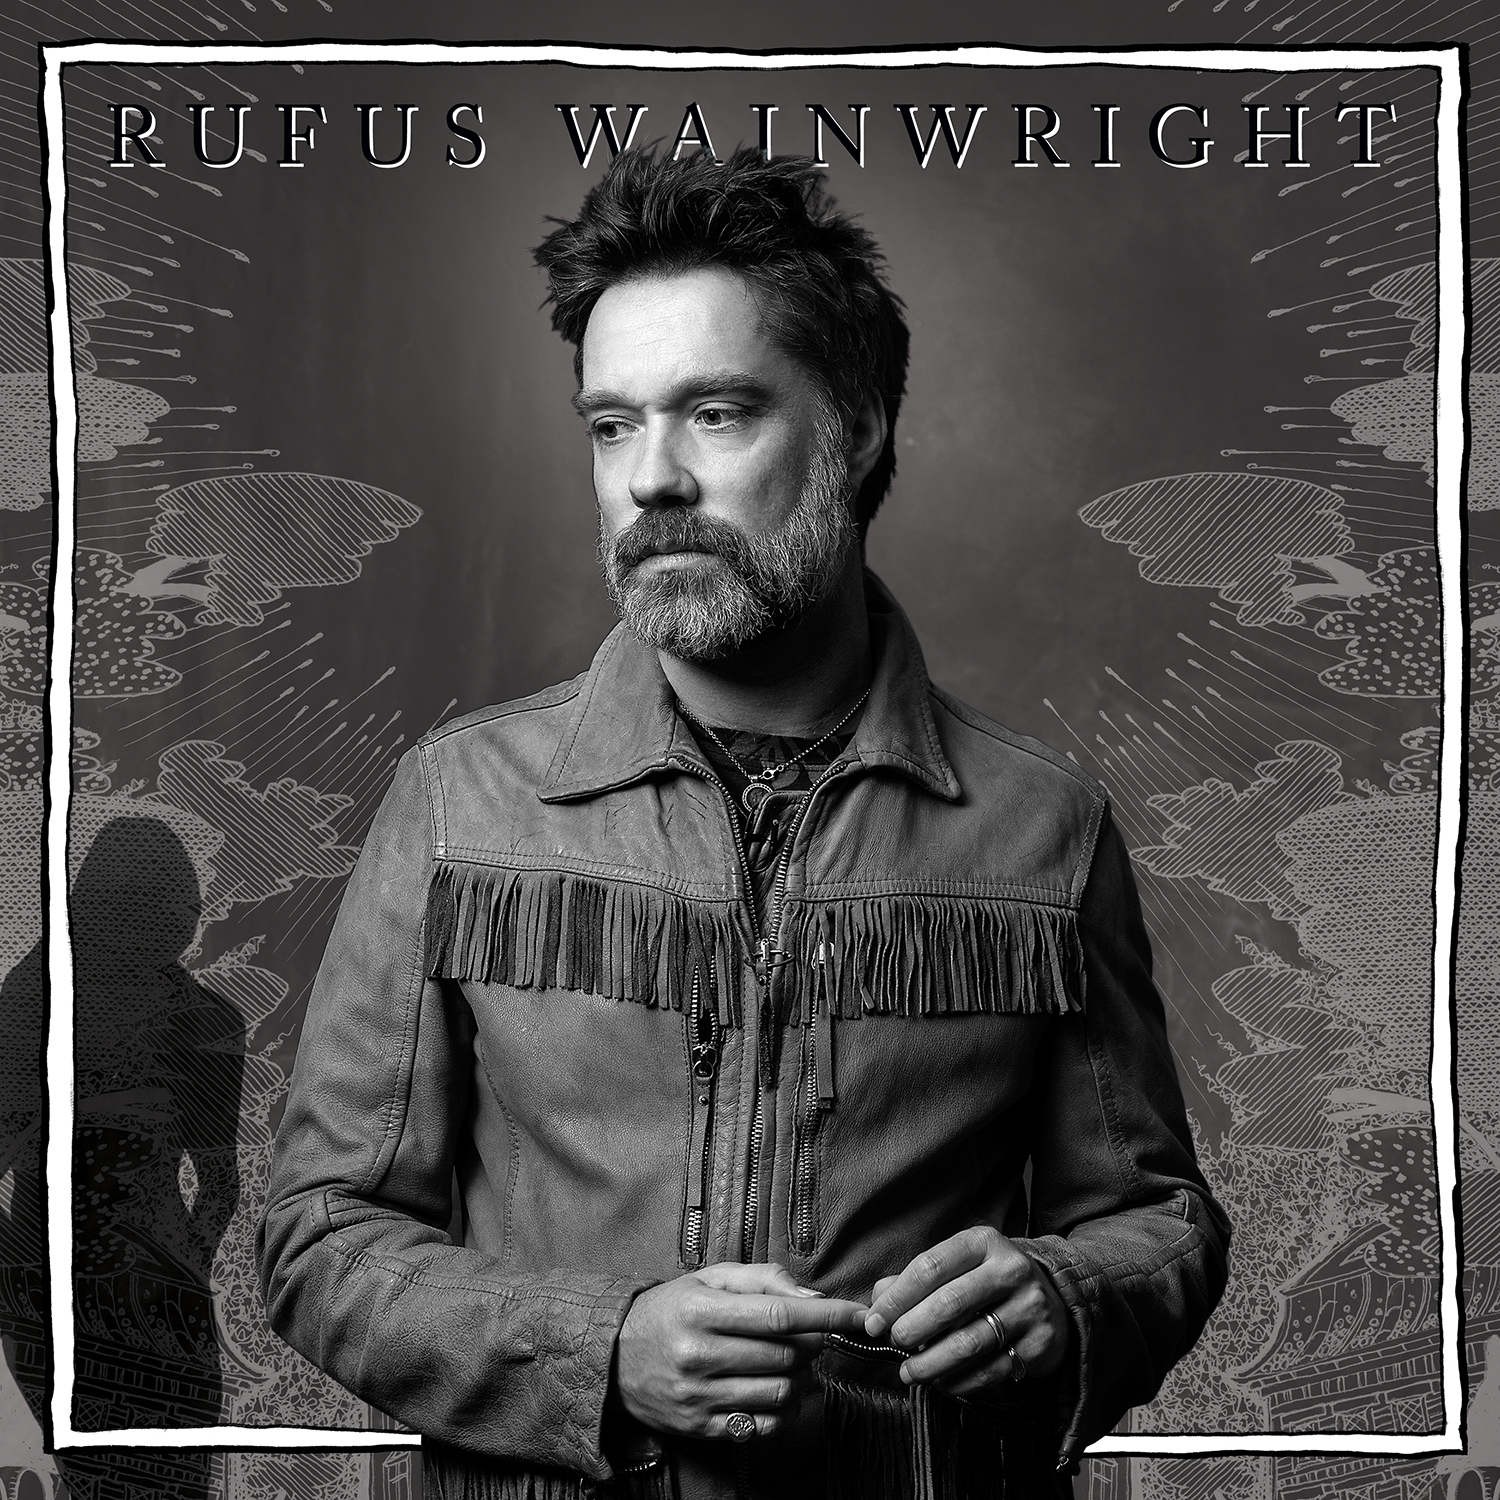 RUFUS WAINWRIGHT UNVEILS LONG AWAITED NEW ALBUM ‘UNFOLLOW THE RULES’ SET FOR RELEASE APRIL 24